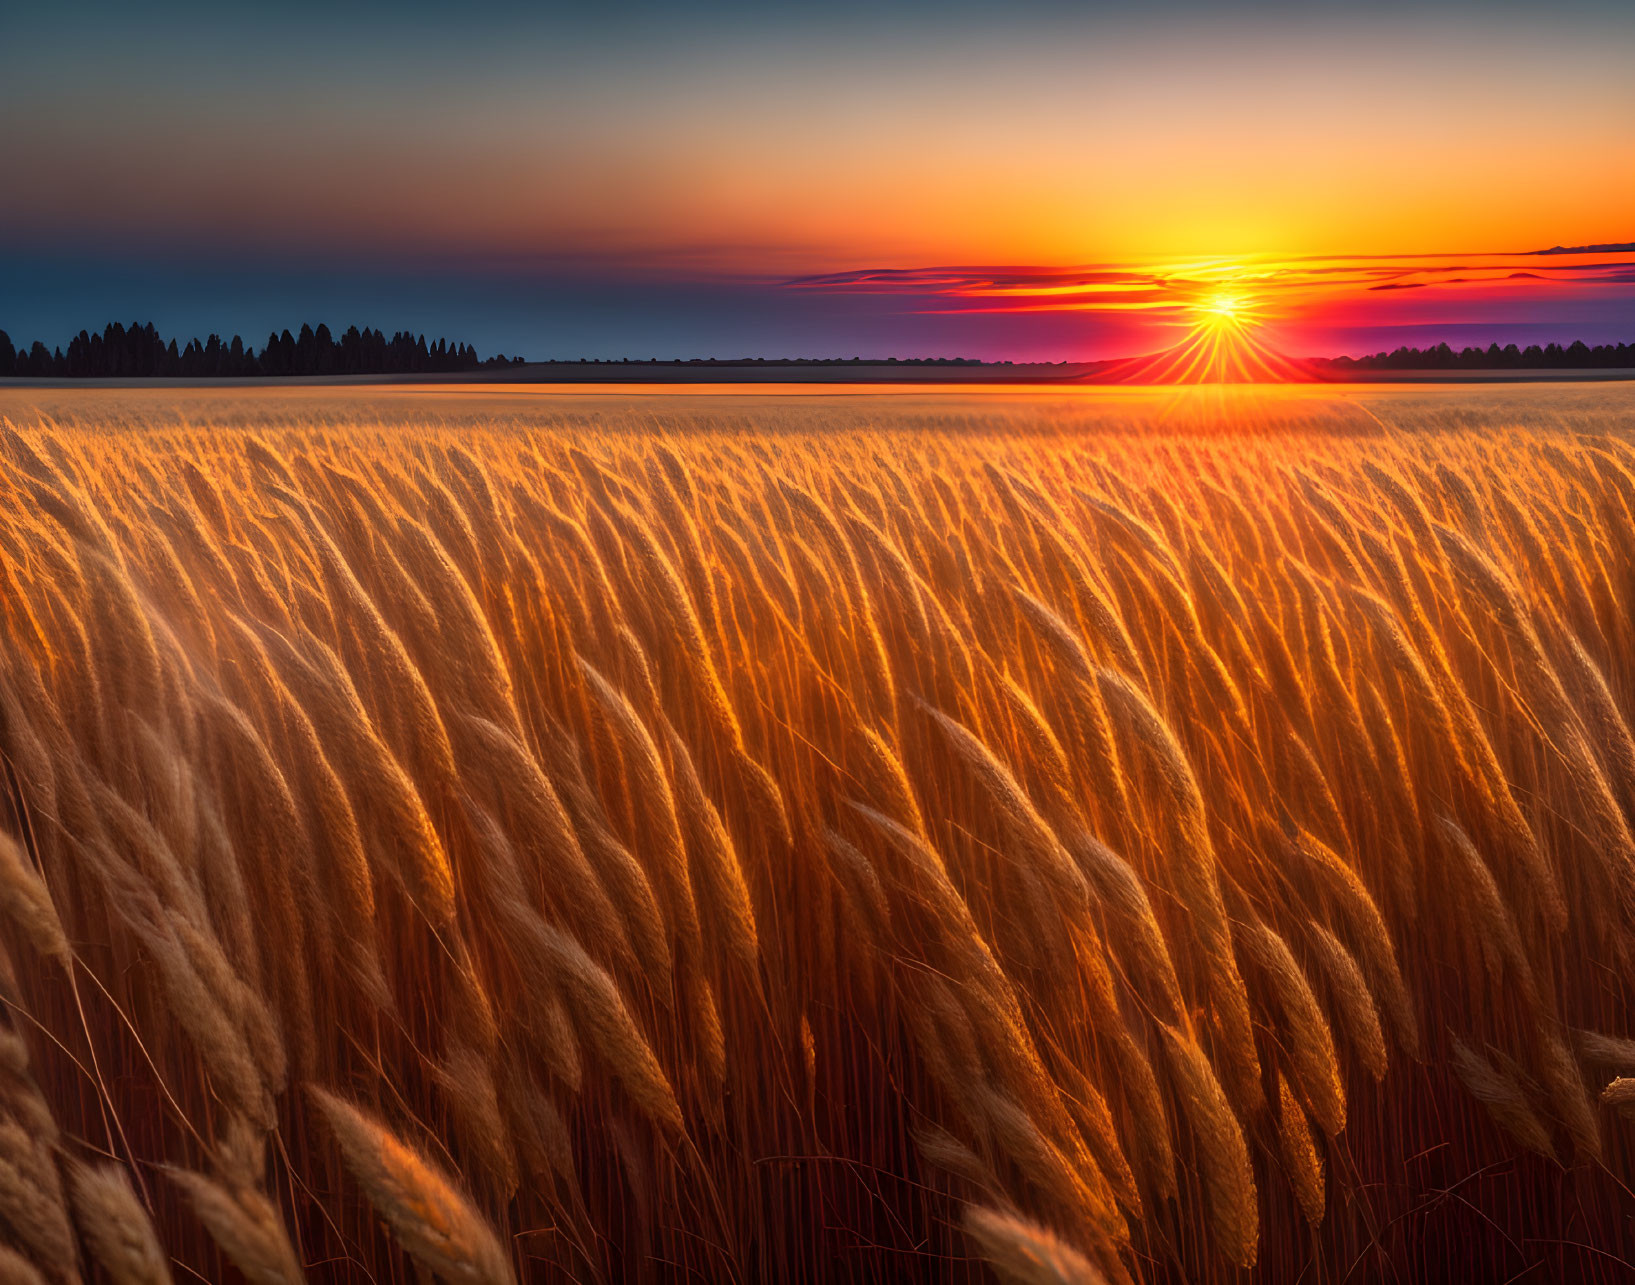 Golden wheat field at sunset with warm colors and rural scenery